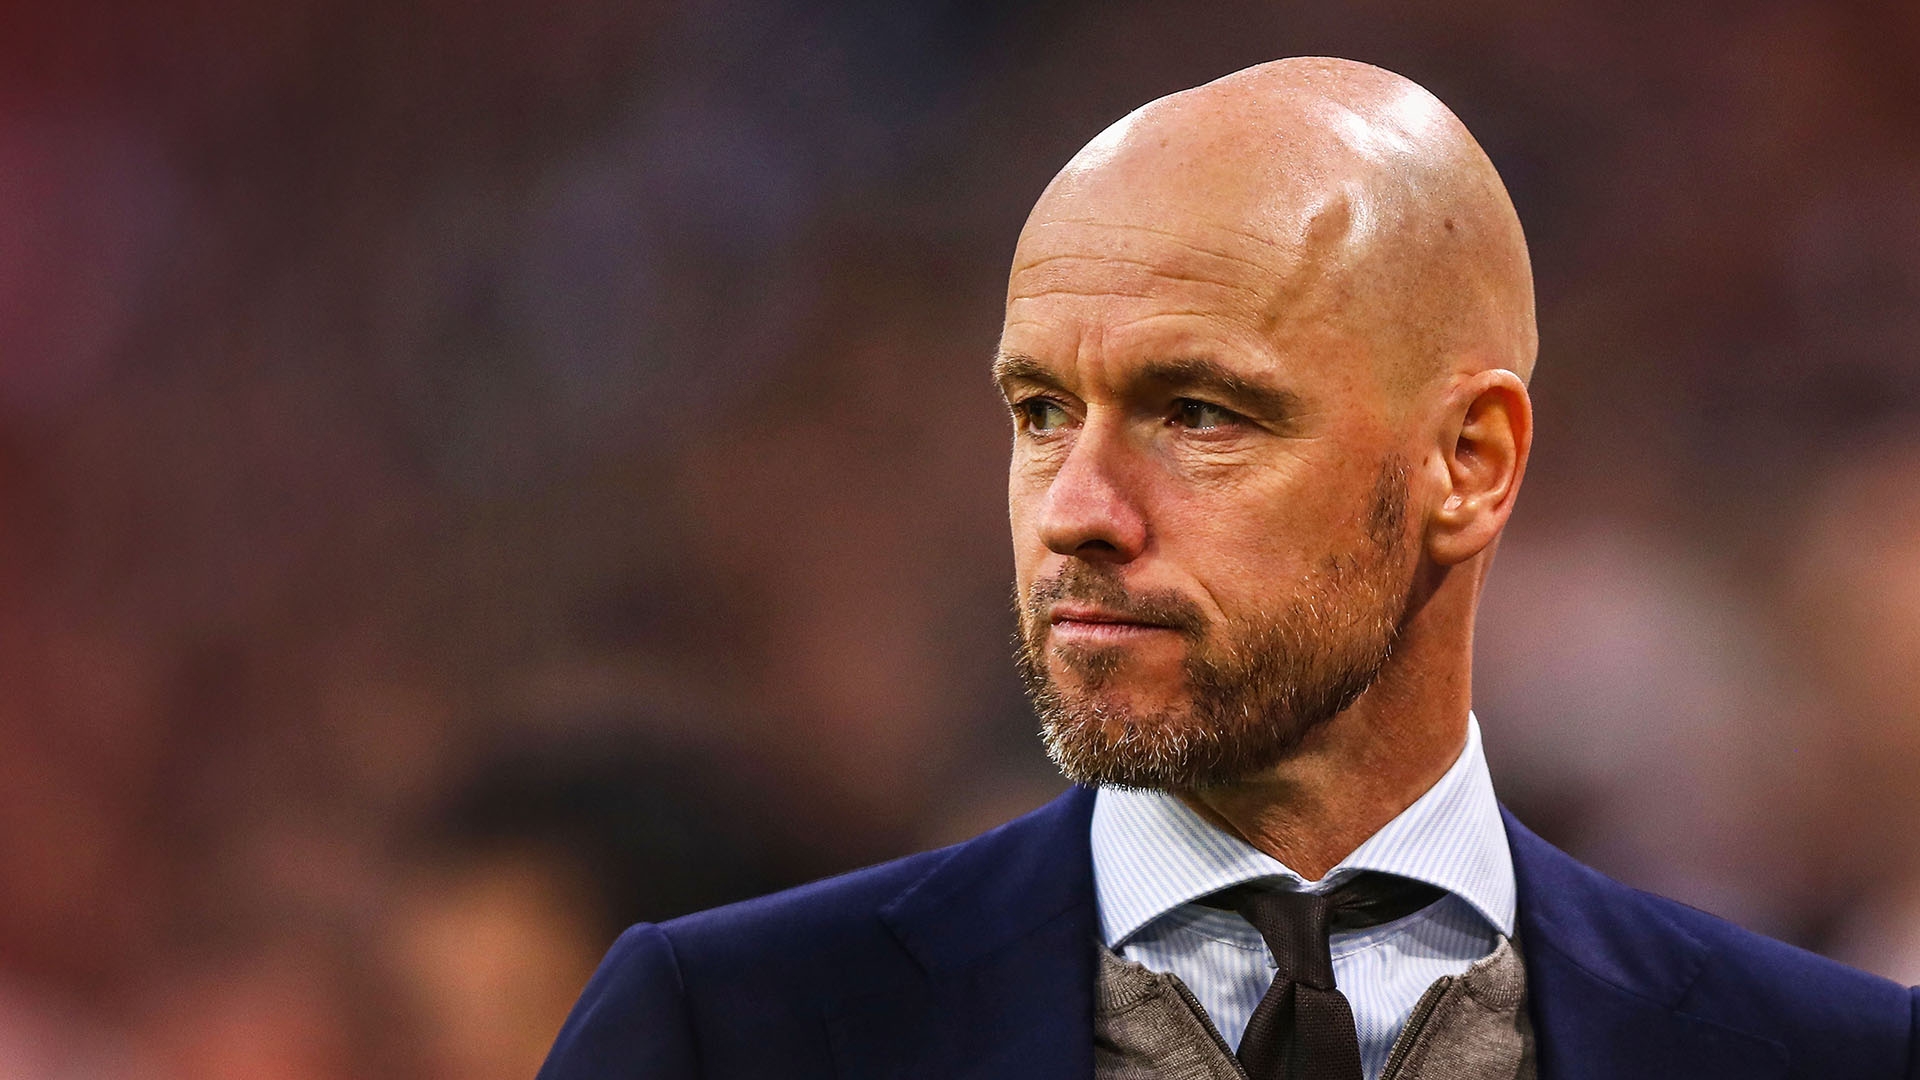 Ten Hag leaves Ajax to get early Man Utd start 'because a lot of things need to be dealt with'. Goal.com US